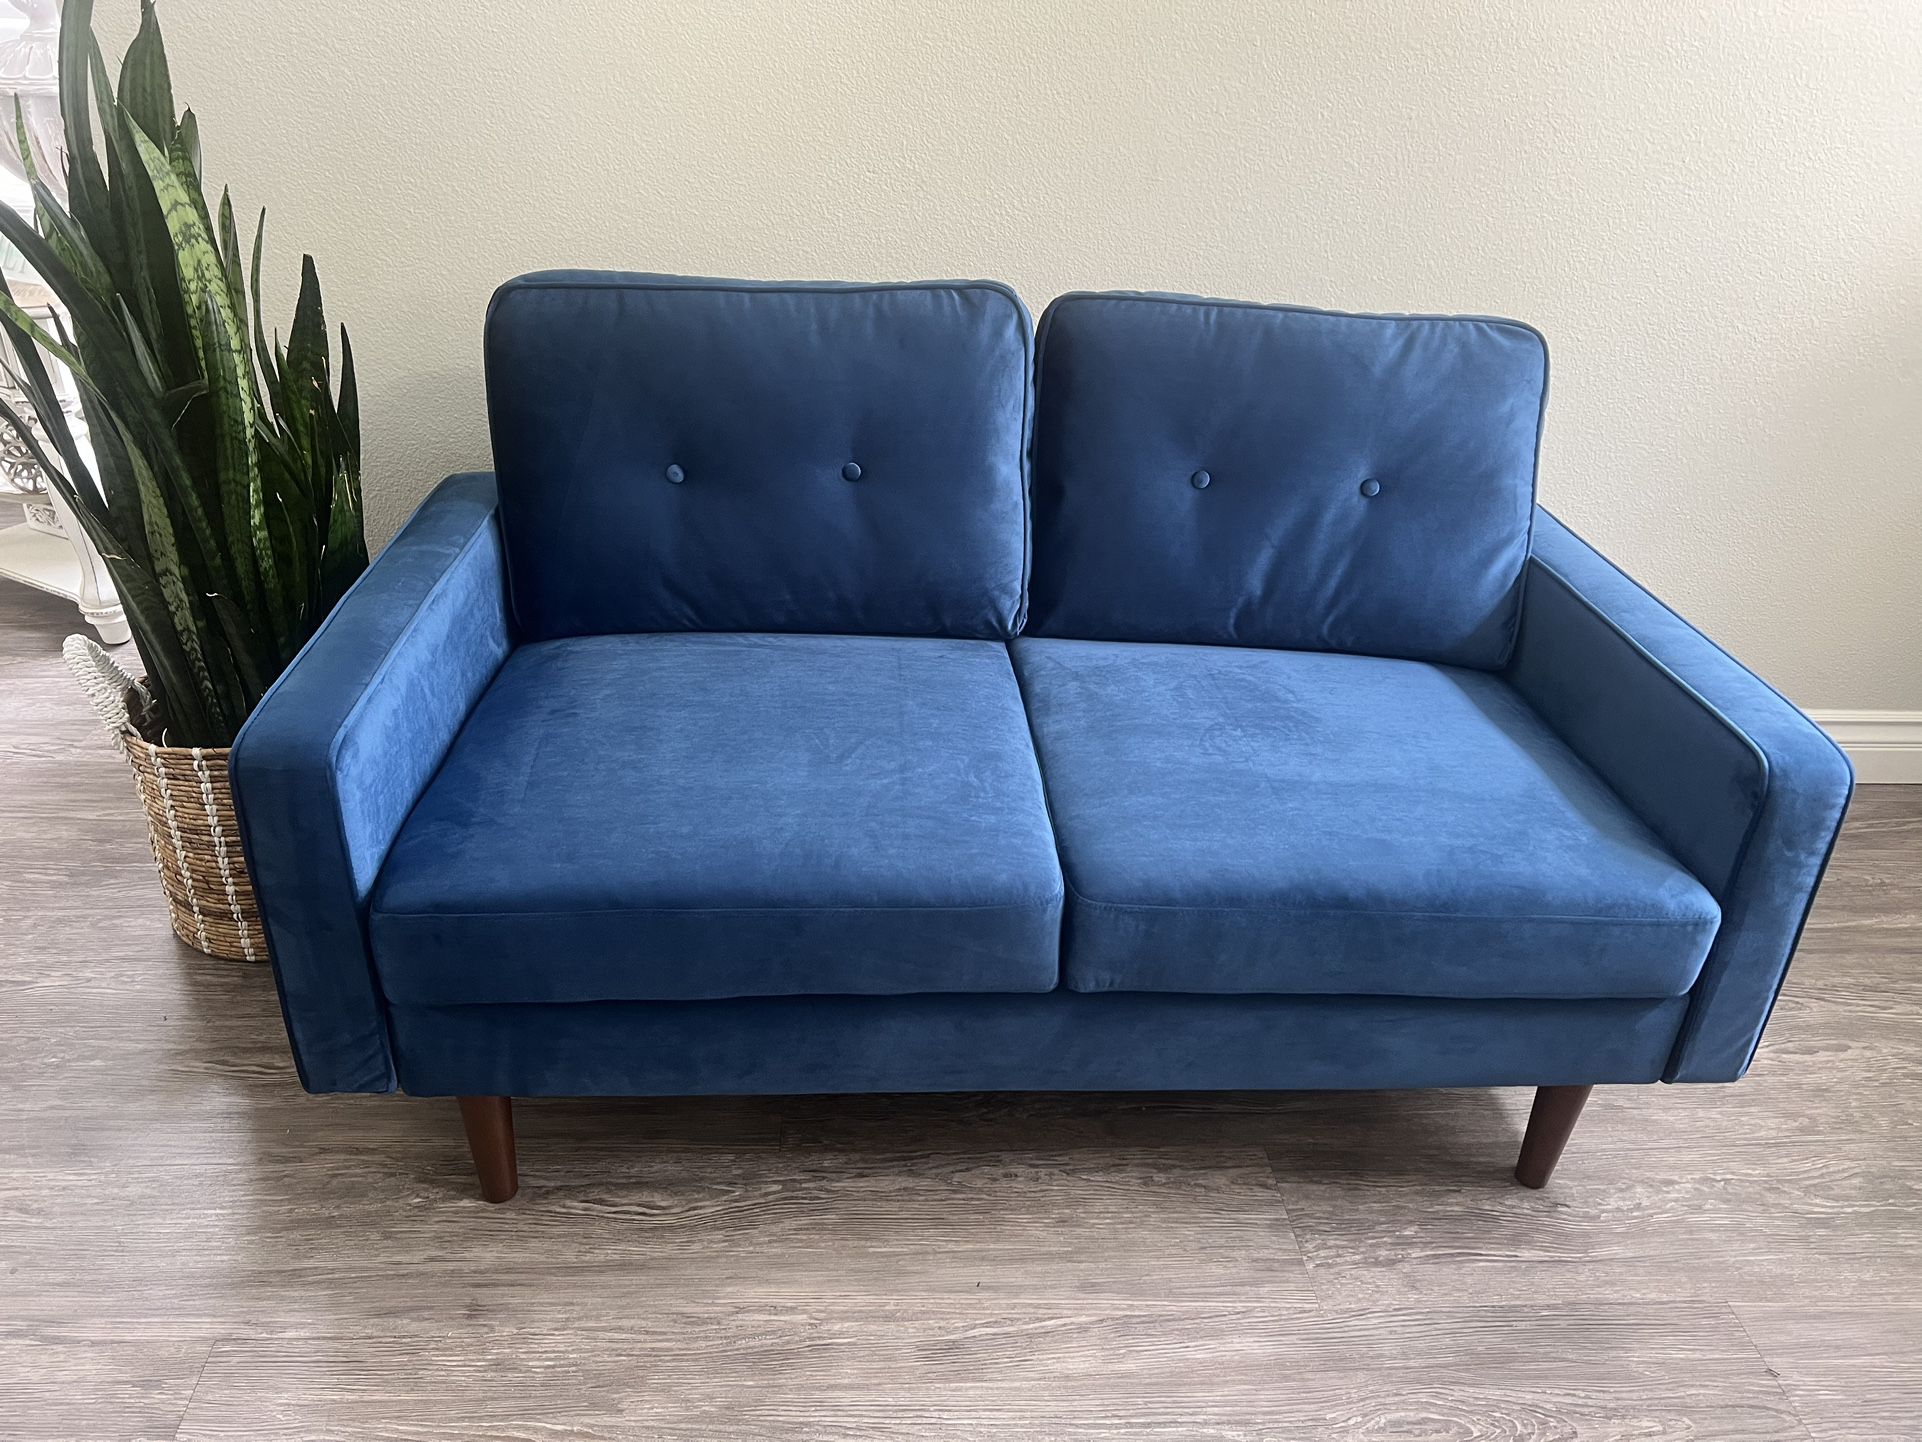 Loveseat Sofa,Futon Sofa for Living Room, Velvet Cover Modern Design Couch,Tools-Free Assemble,2 Seats with 600 LB Load,Blue